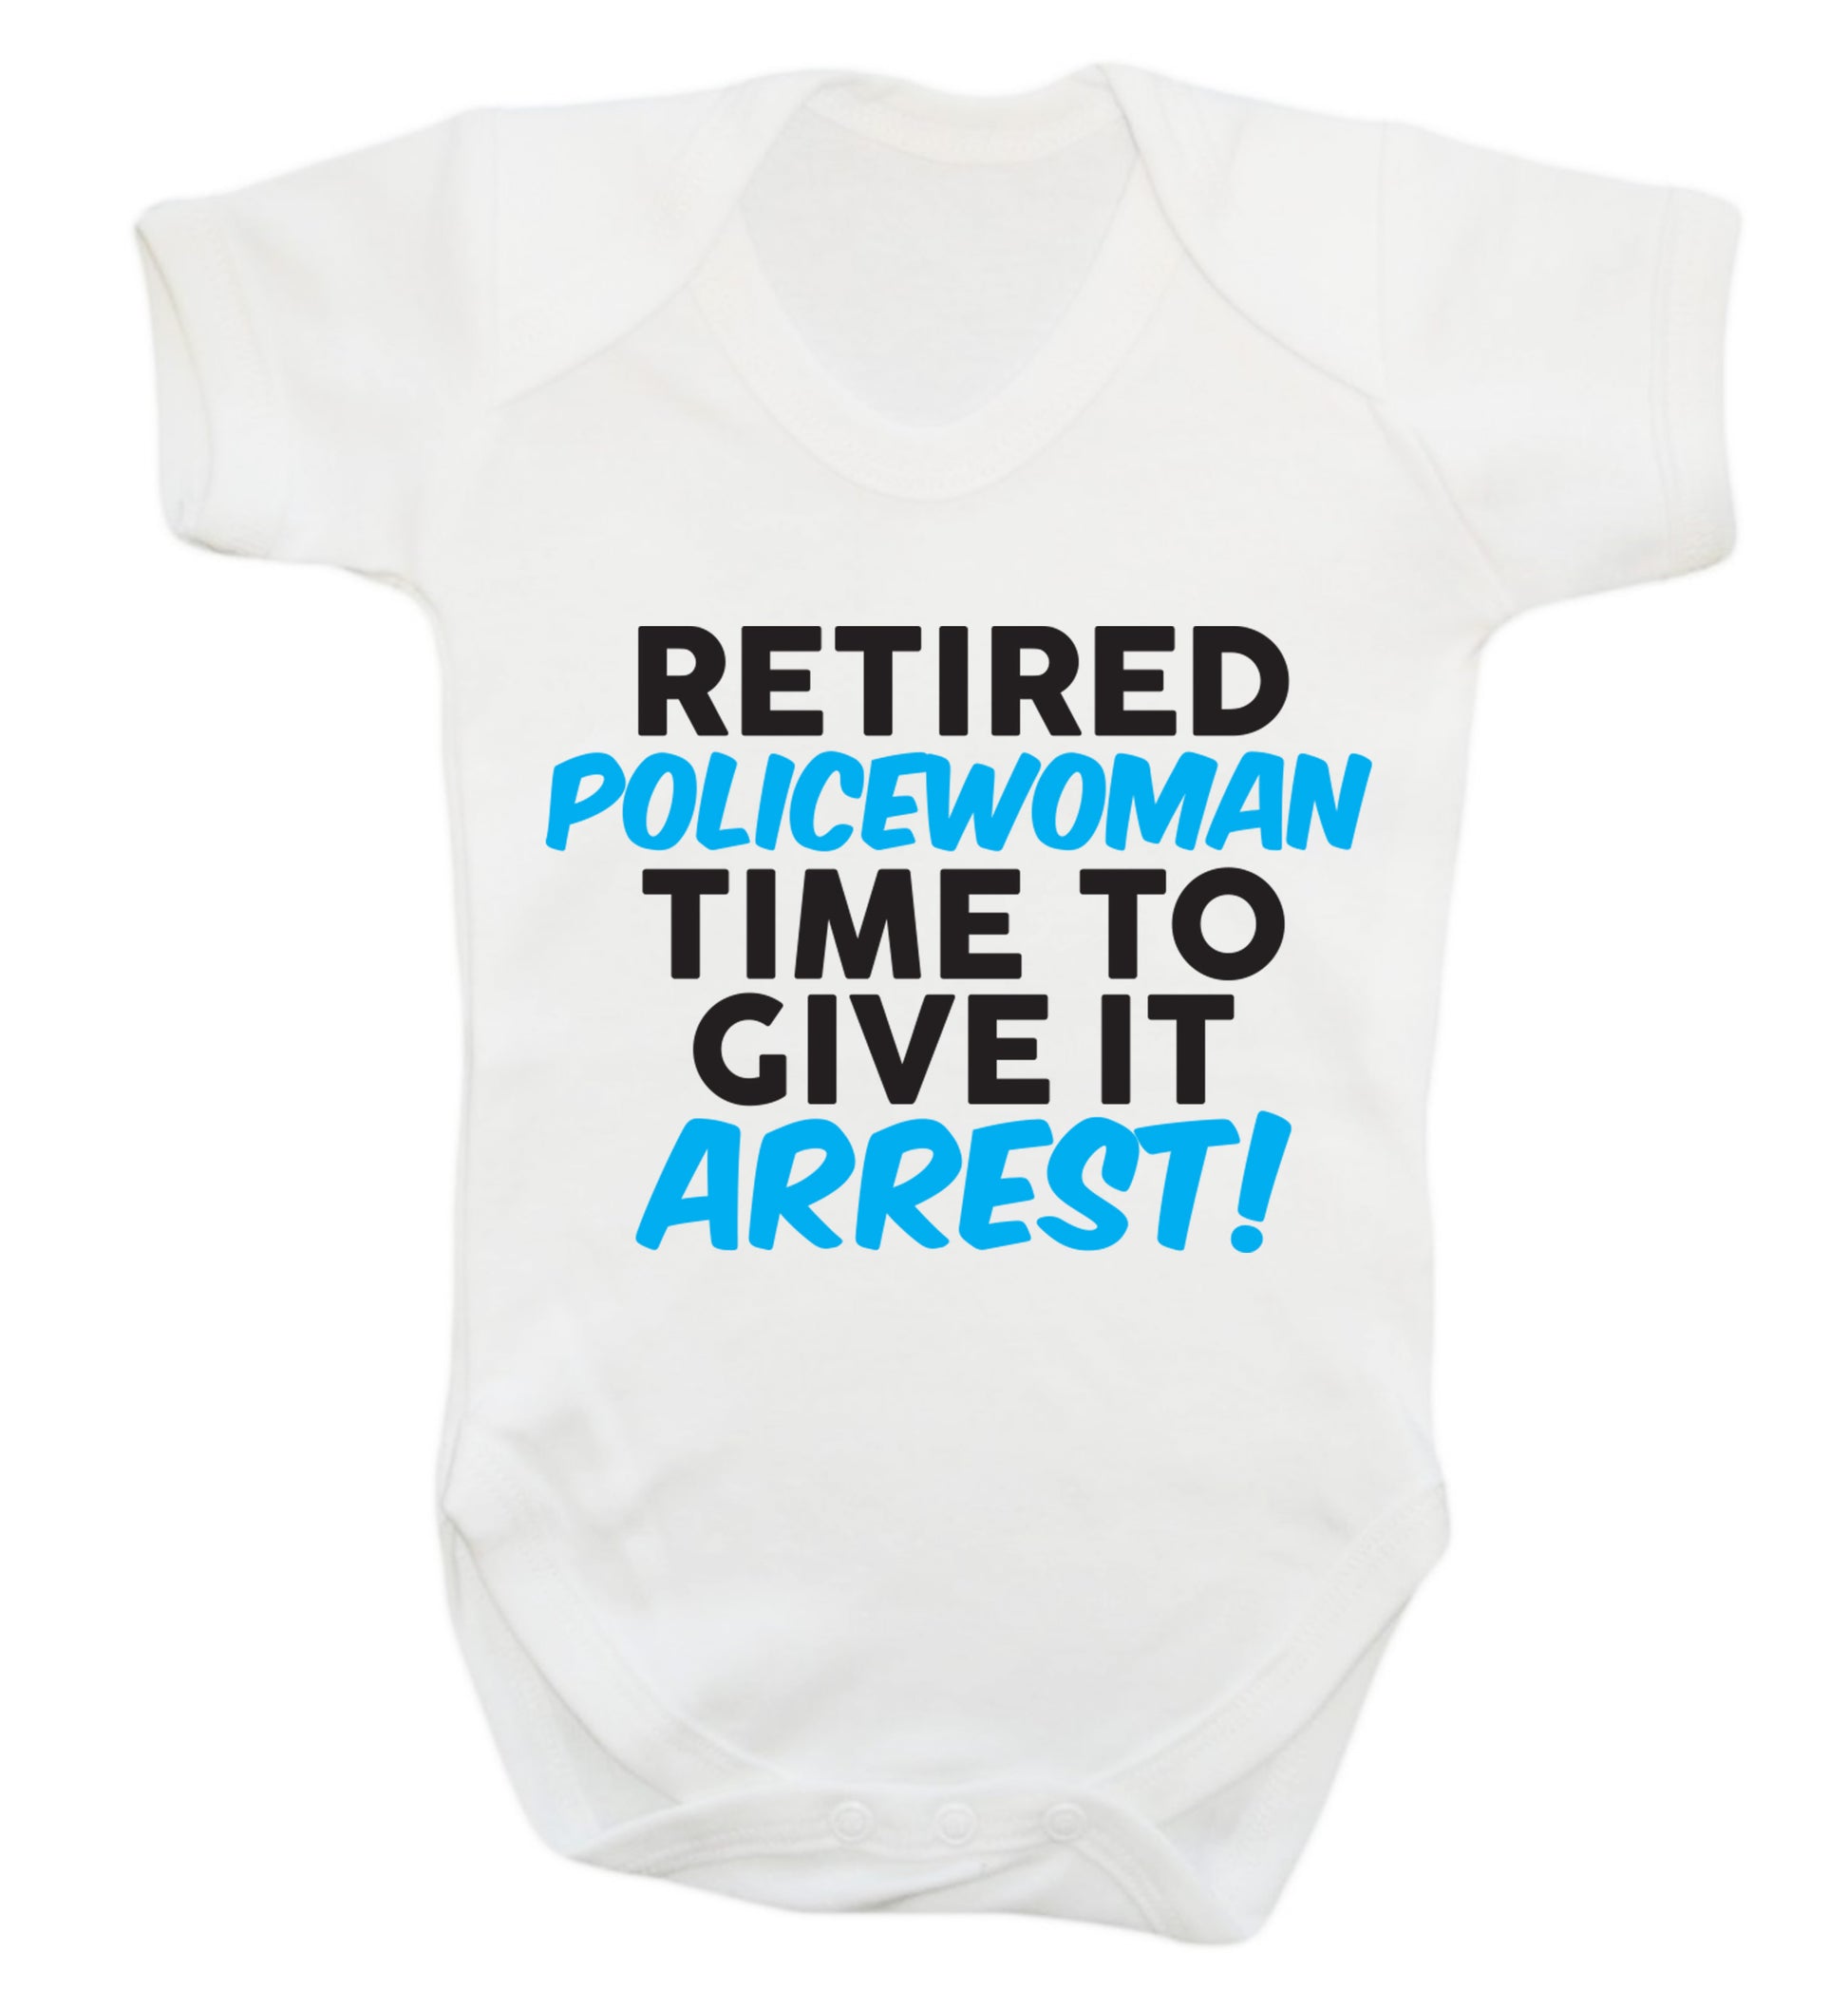 Retired policewoman time to give it arrest Baby Vest white 18-24 months